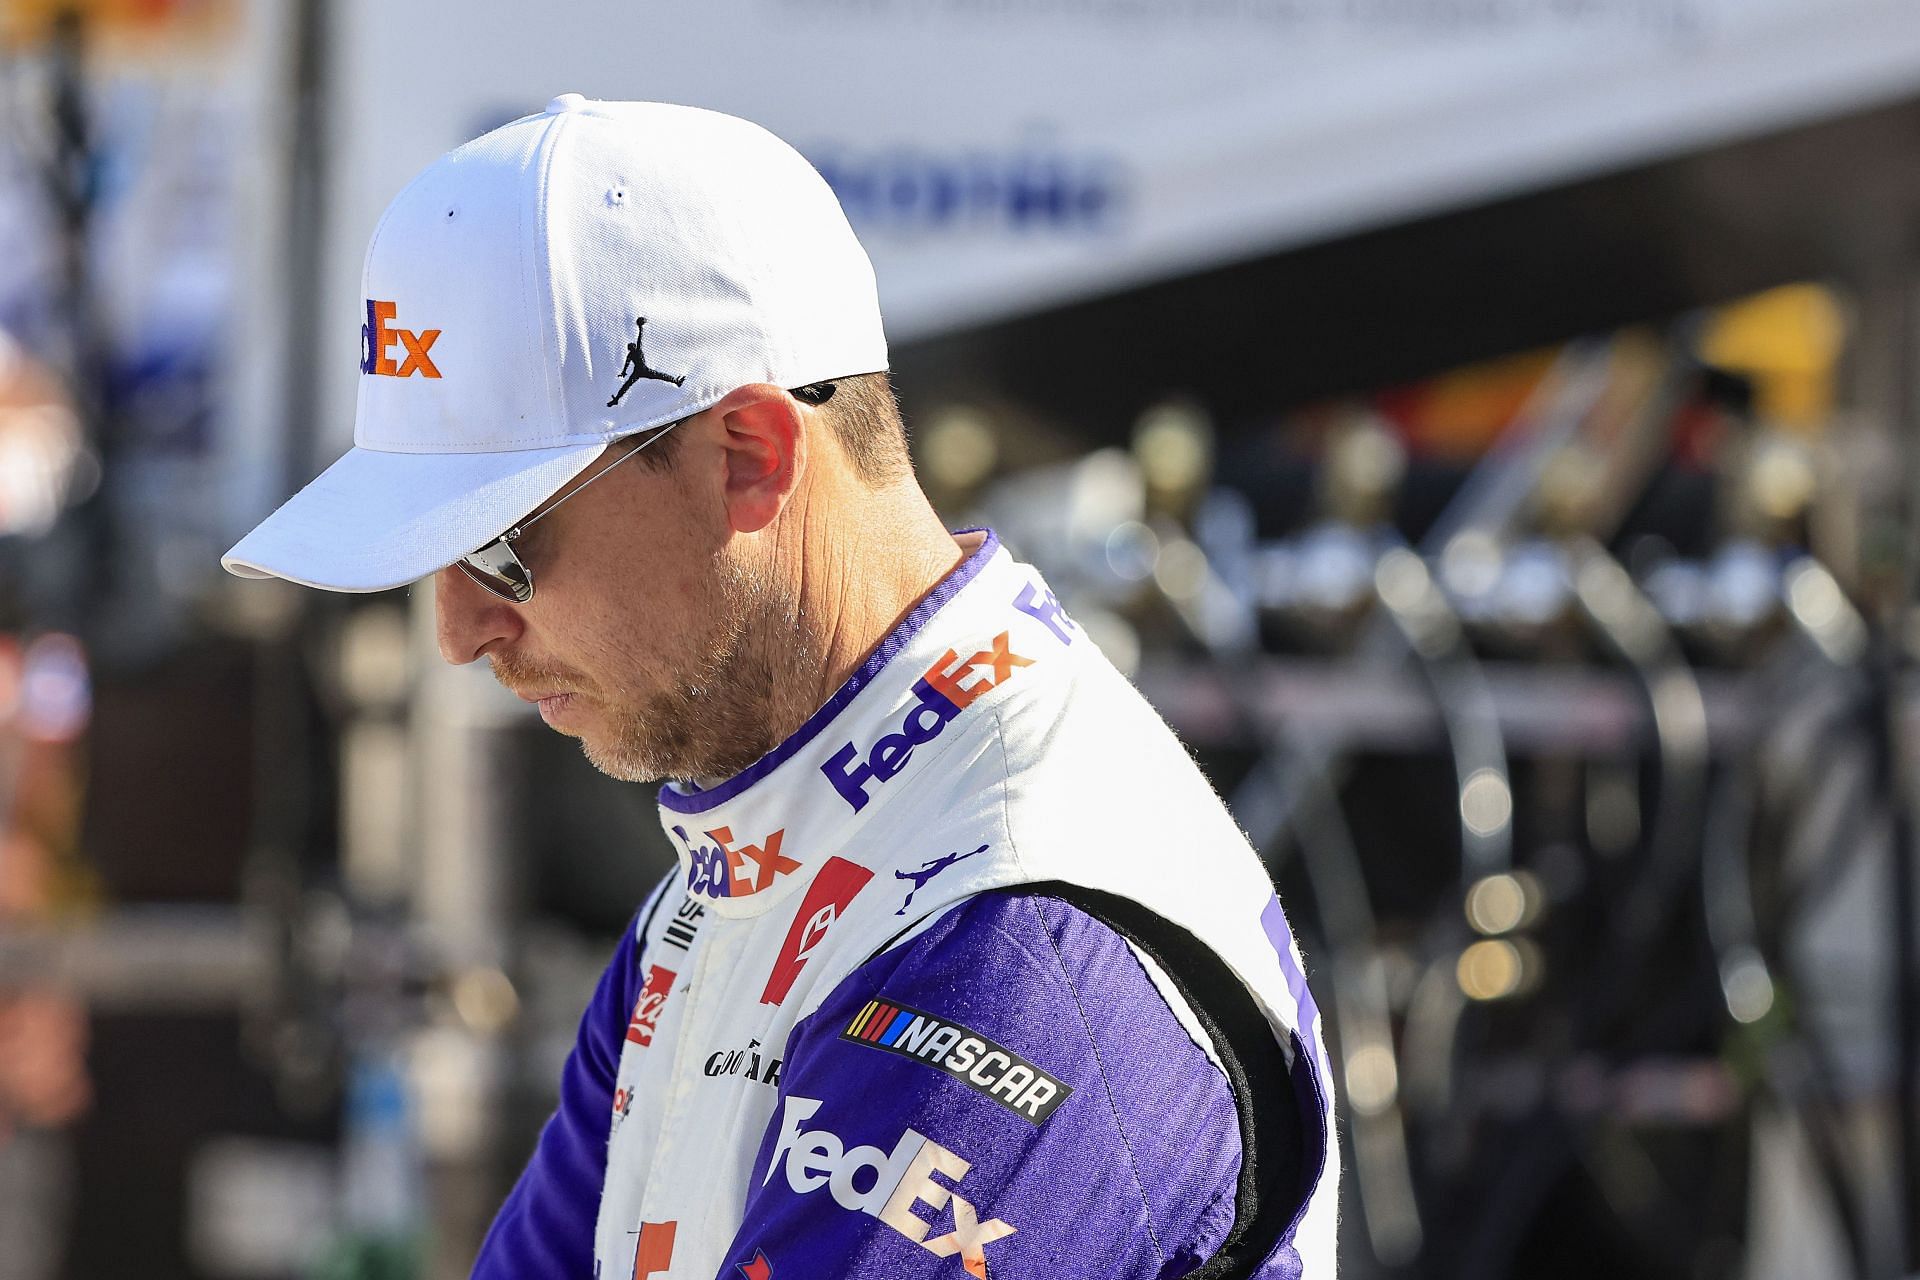 Denny Hamlin waits on the grid during practice for the NASCAR Cup Series Verizon 200 at the Brickyard at Indianapolis Motor Speedway